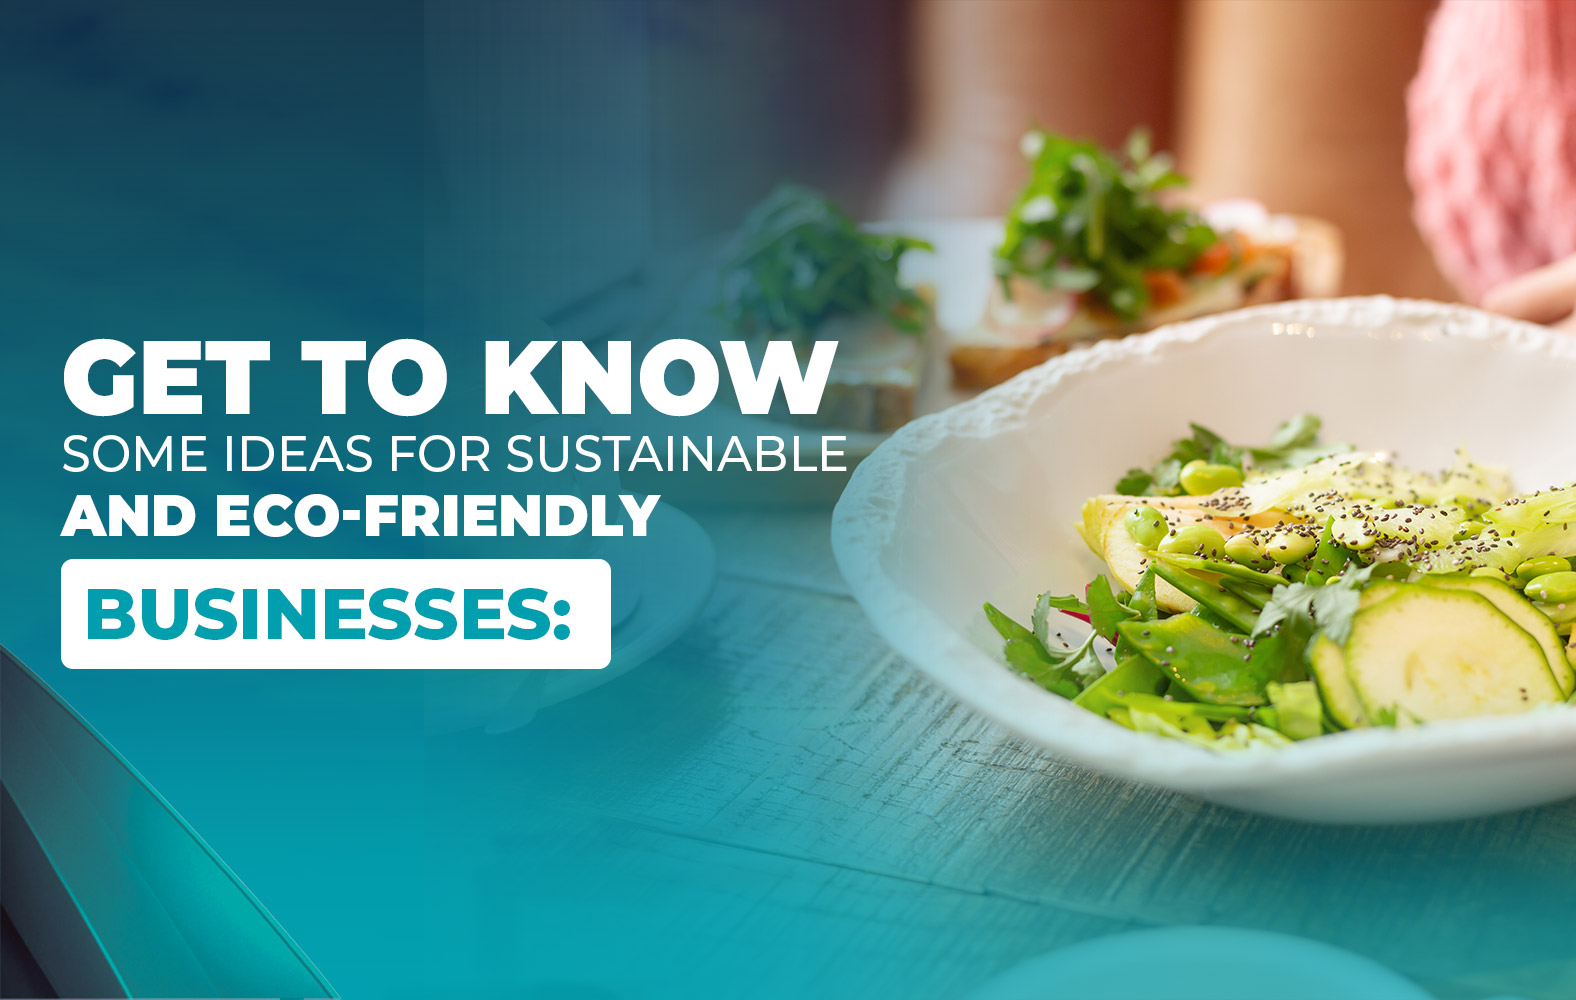 GET TO KNOW SOME IDEAS FOR SUSTAINABLE AND ECO-FRIENDLY BUSINESSES: